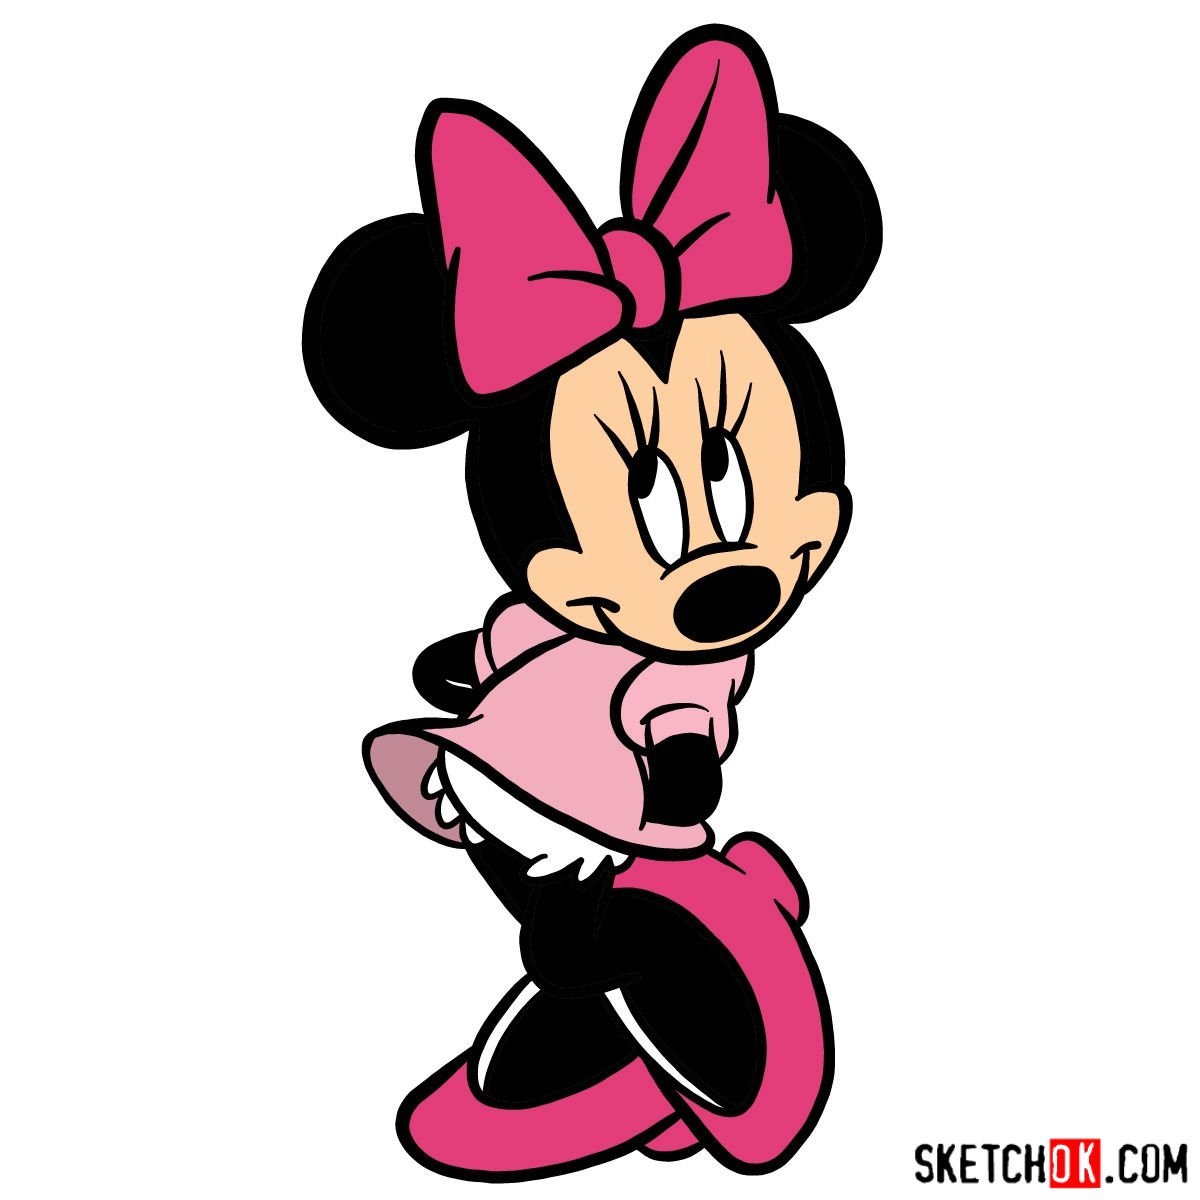 Mickey Mouse Drawing Tutorial - How to draw Mickey Mouse step by step